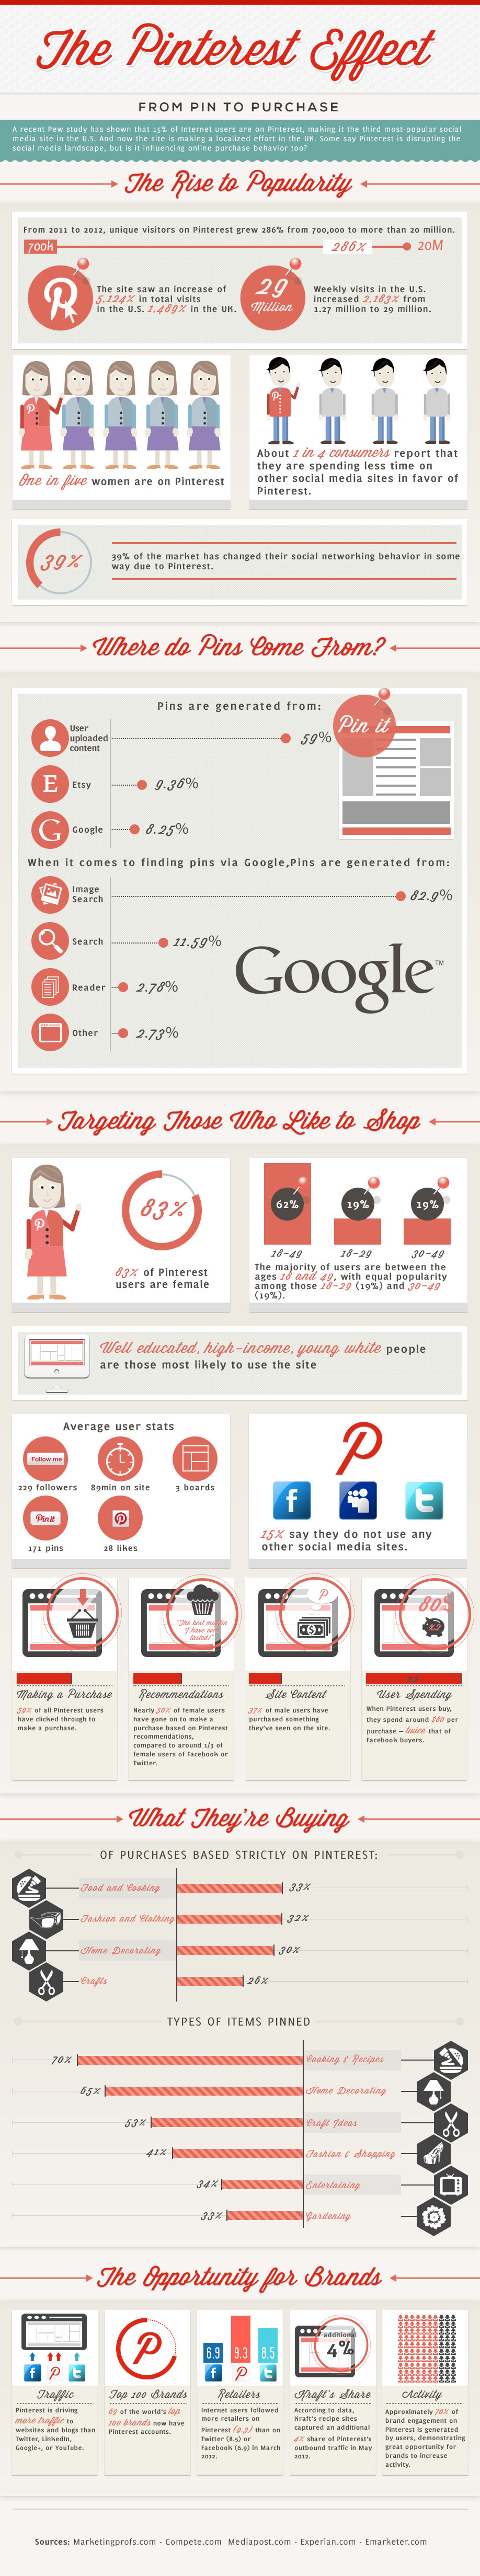 The Pinterest Effect: From Pin to Purchase